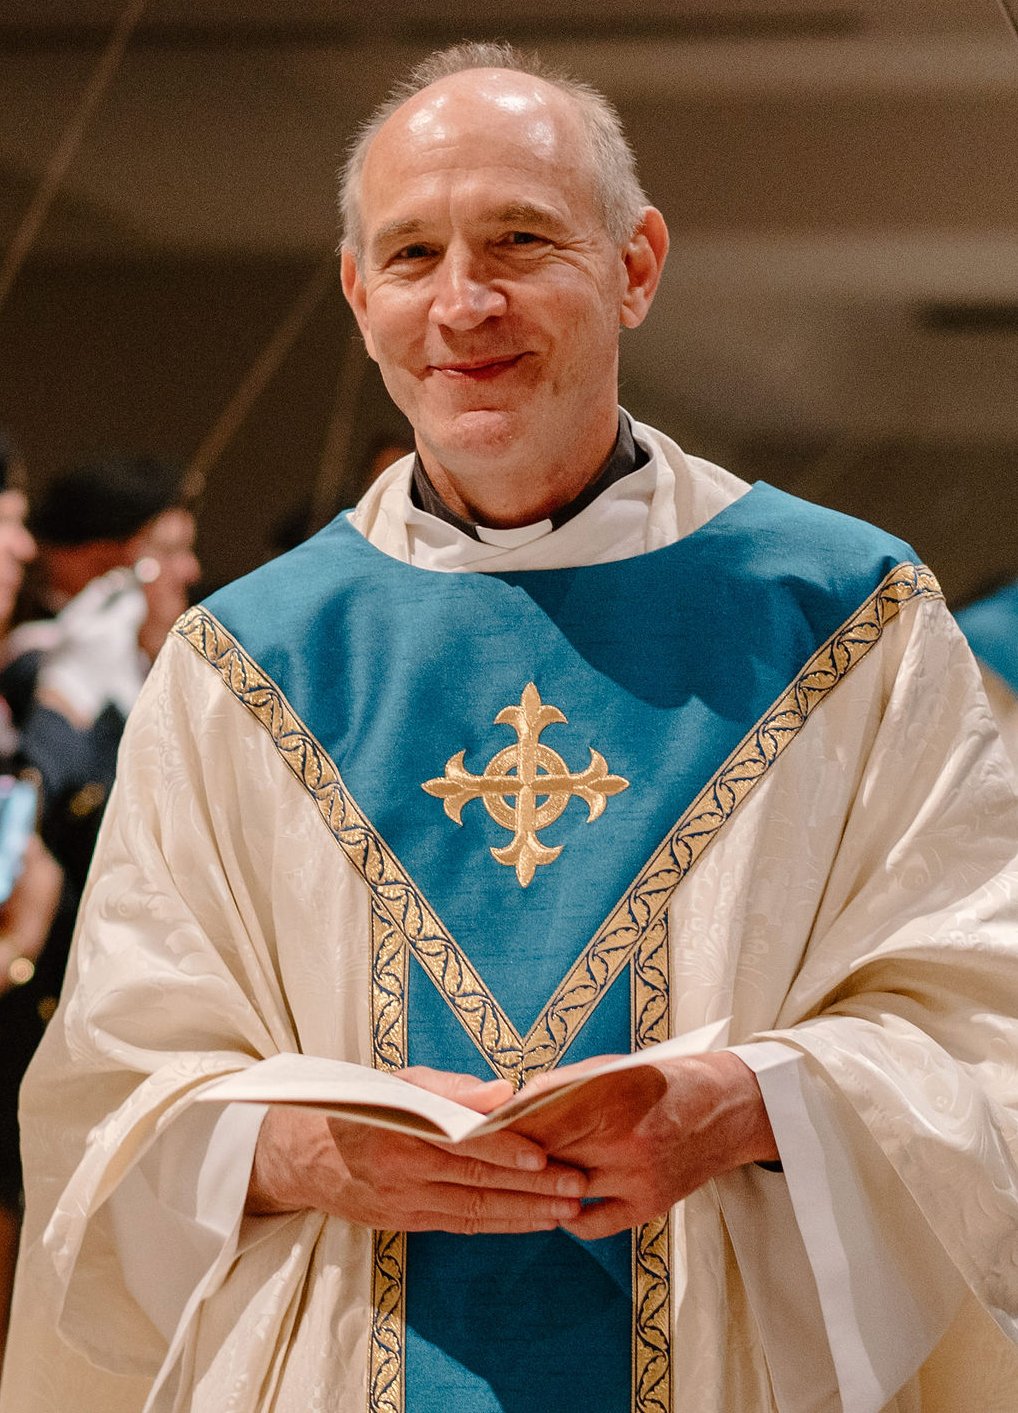 Pope Francis has appointed Father James M. Beckman, a priest of the Diocese of Nashville, Tenn., to be the bishop of Knoxville. Bishop-designate Beckman is pictured in an undated photo. (OSV News photo/courtesy Diocese of Nashville)